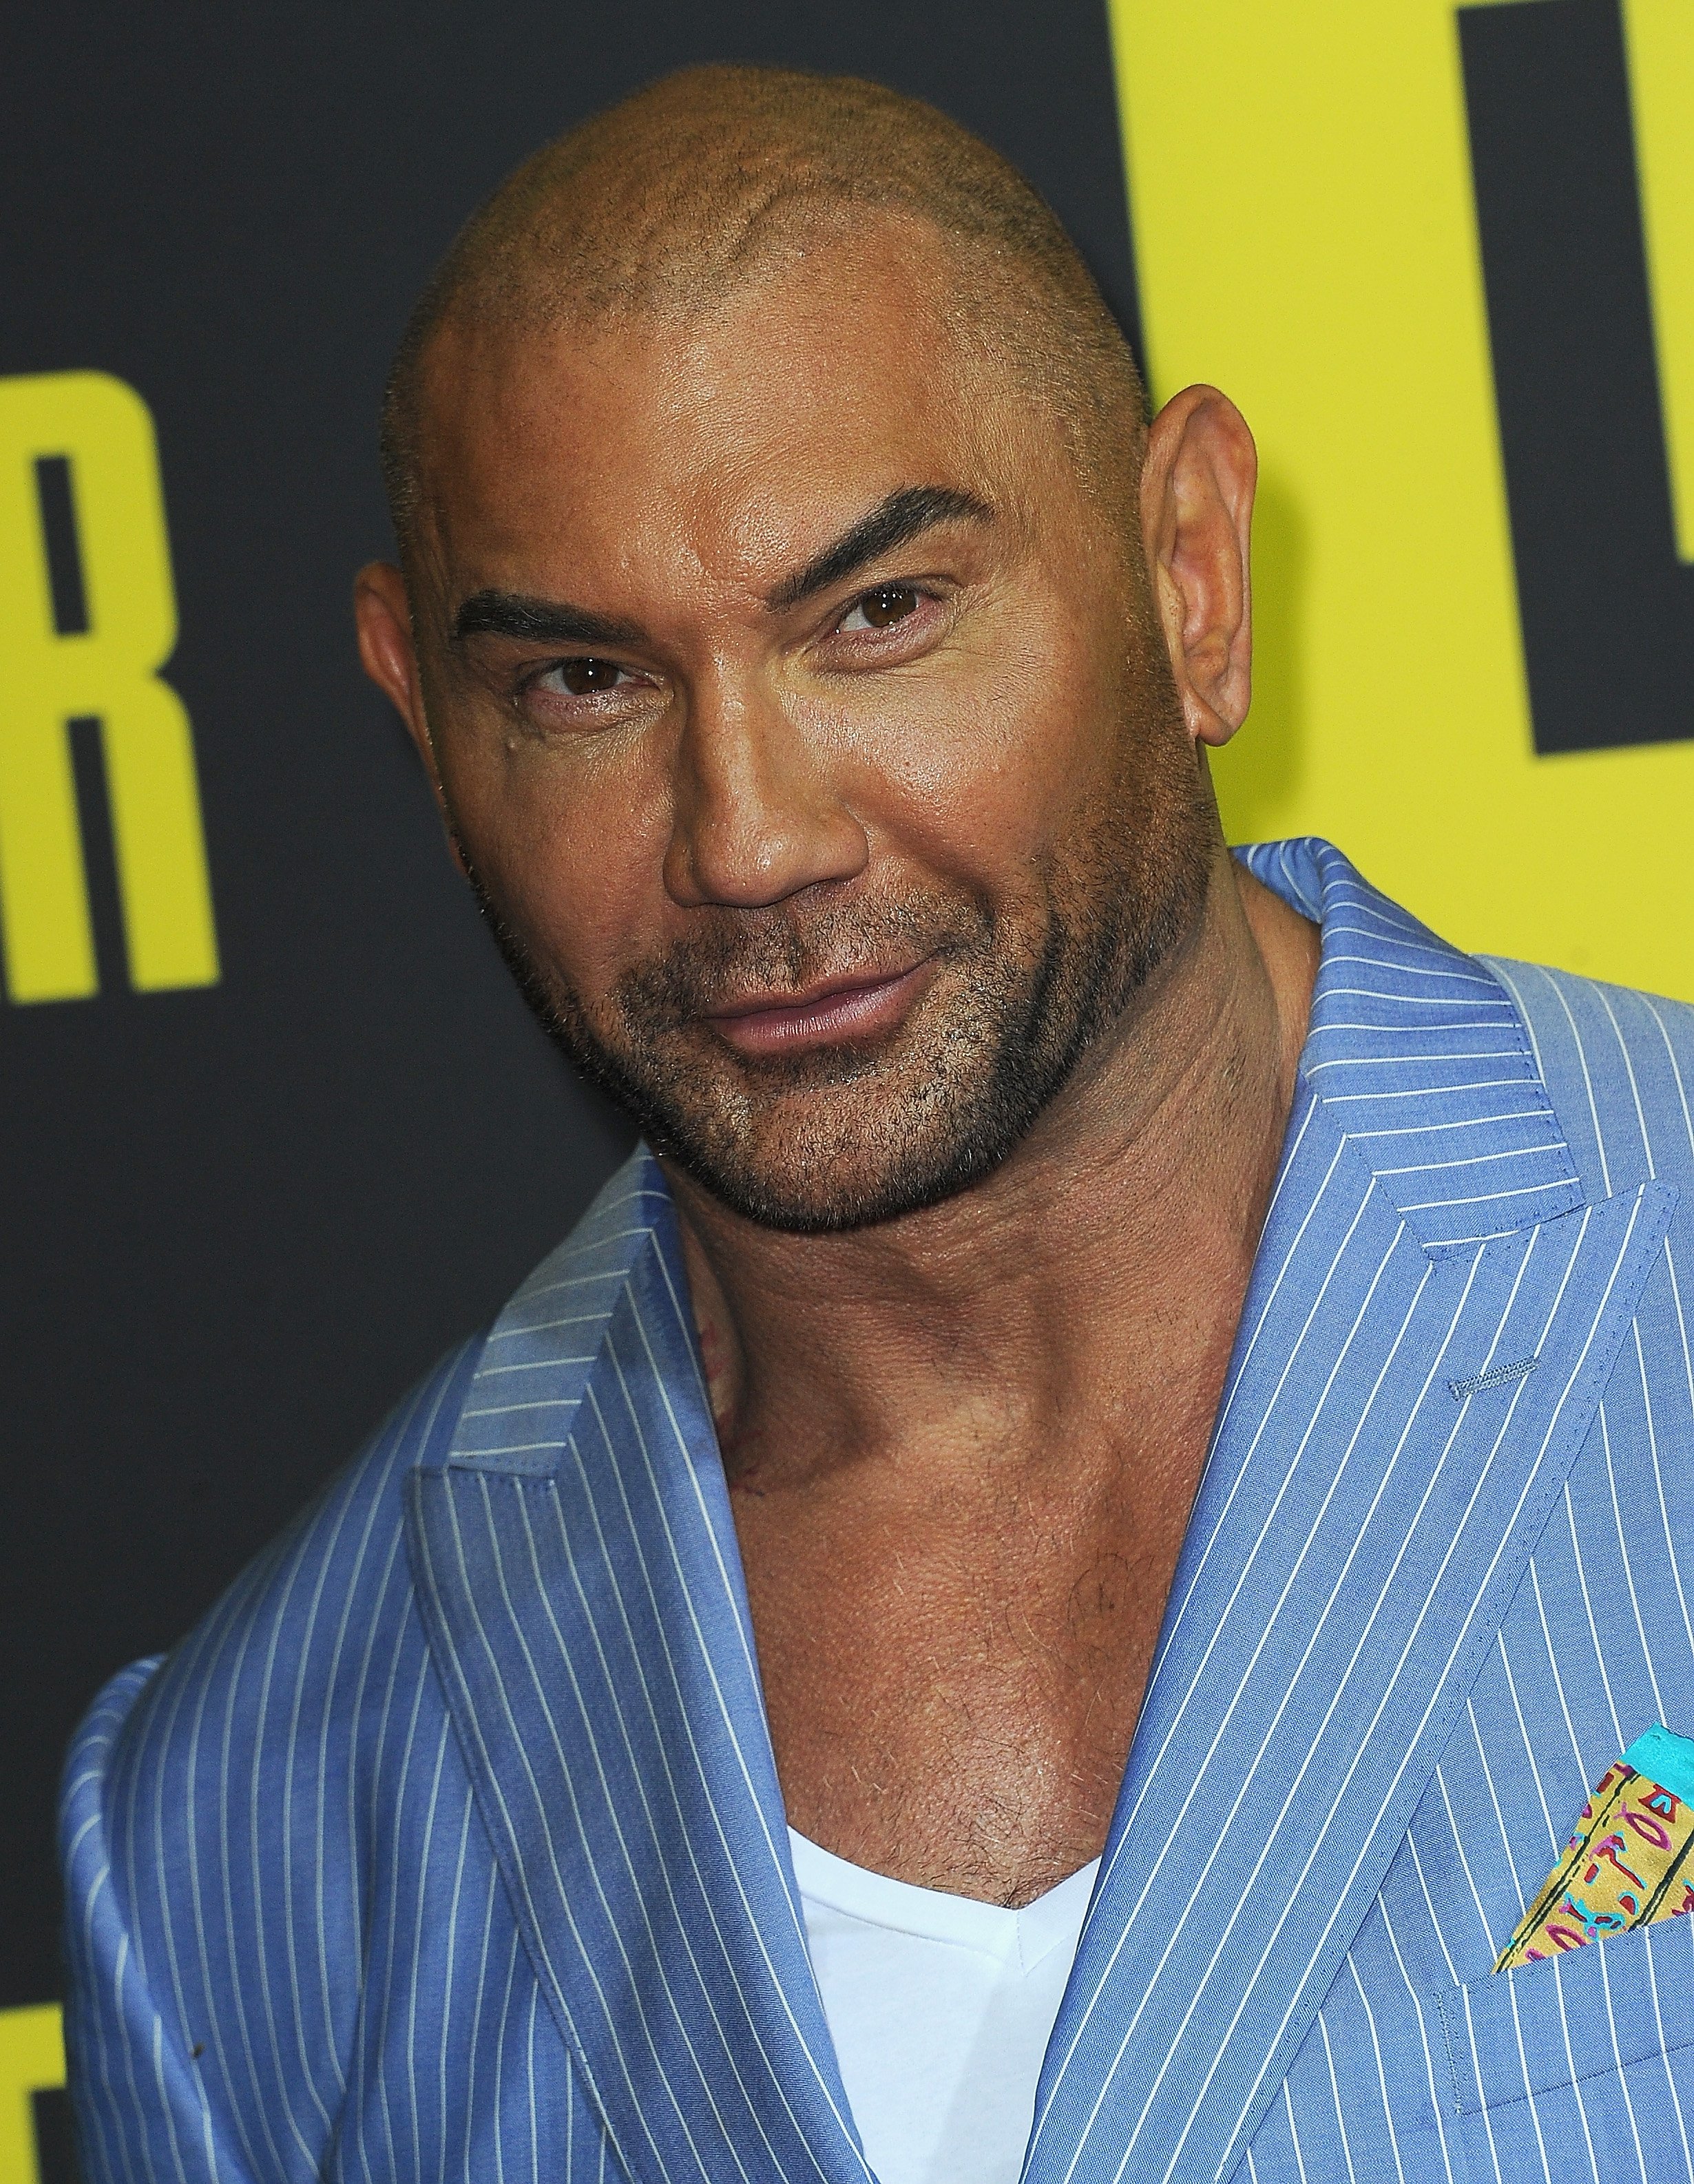  Dave Bautista at the premiere of 20th Century Fox's "Stuber" in 2019 in Los Angeles. | Source: Getty Images